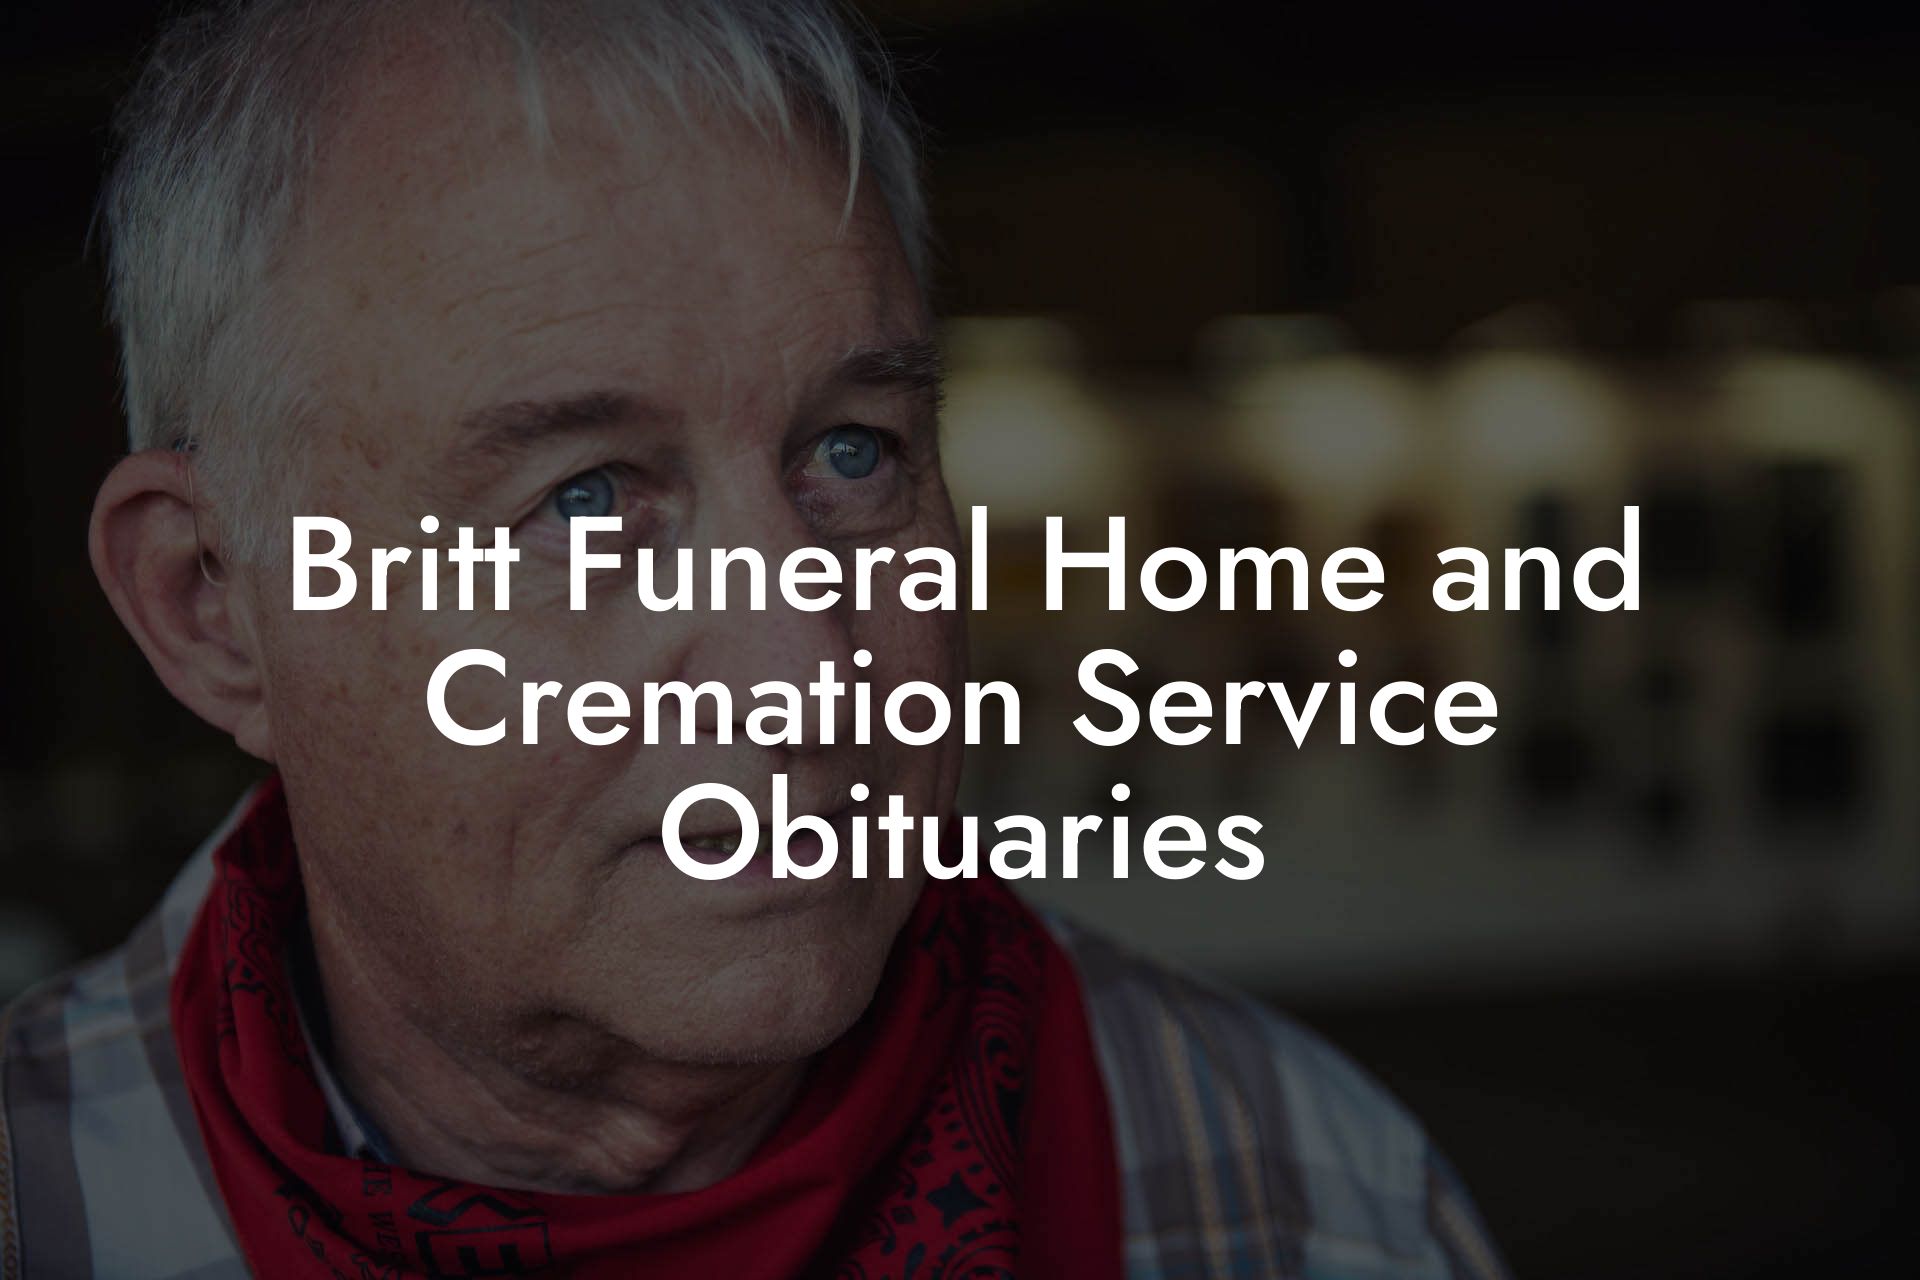 Britt Funeral Home and Cremation Service Obituaries